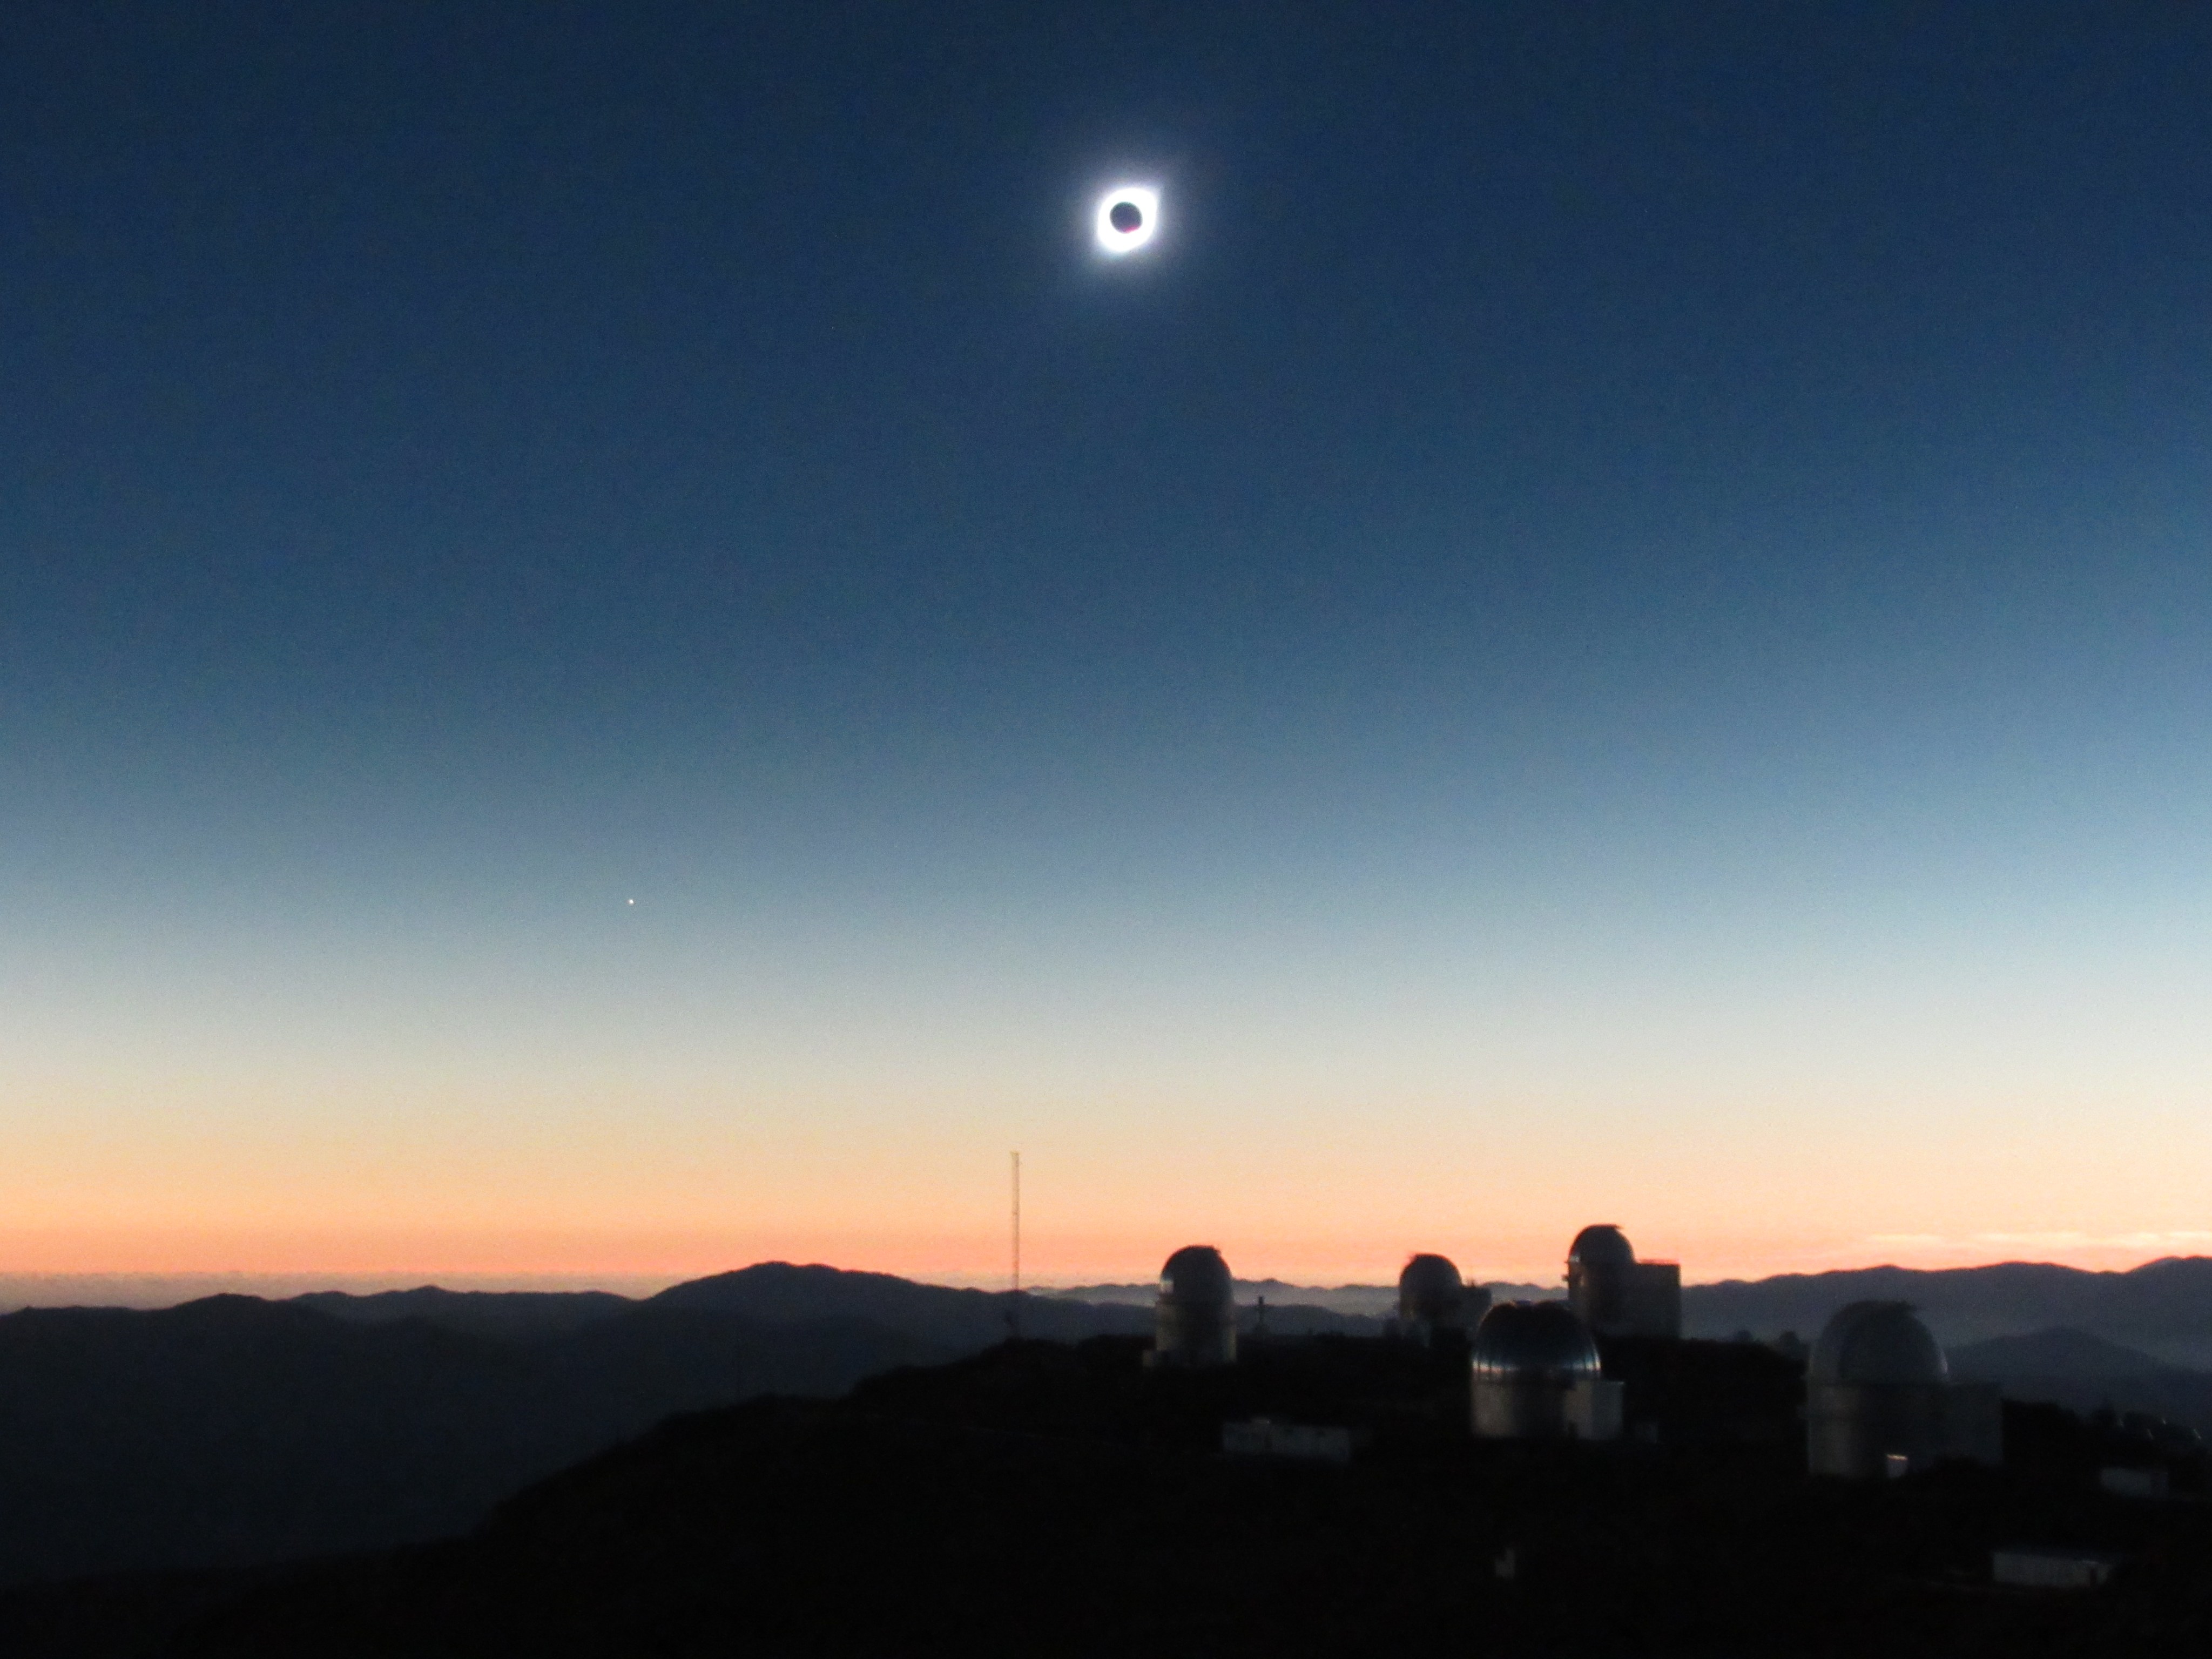 A total solar eclipse is seen high in the sky against a sky that fades from dark blue, to light blue, to light orange and pink. Closer to the landscape a faint white dot is there – Venus.